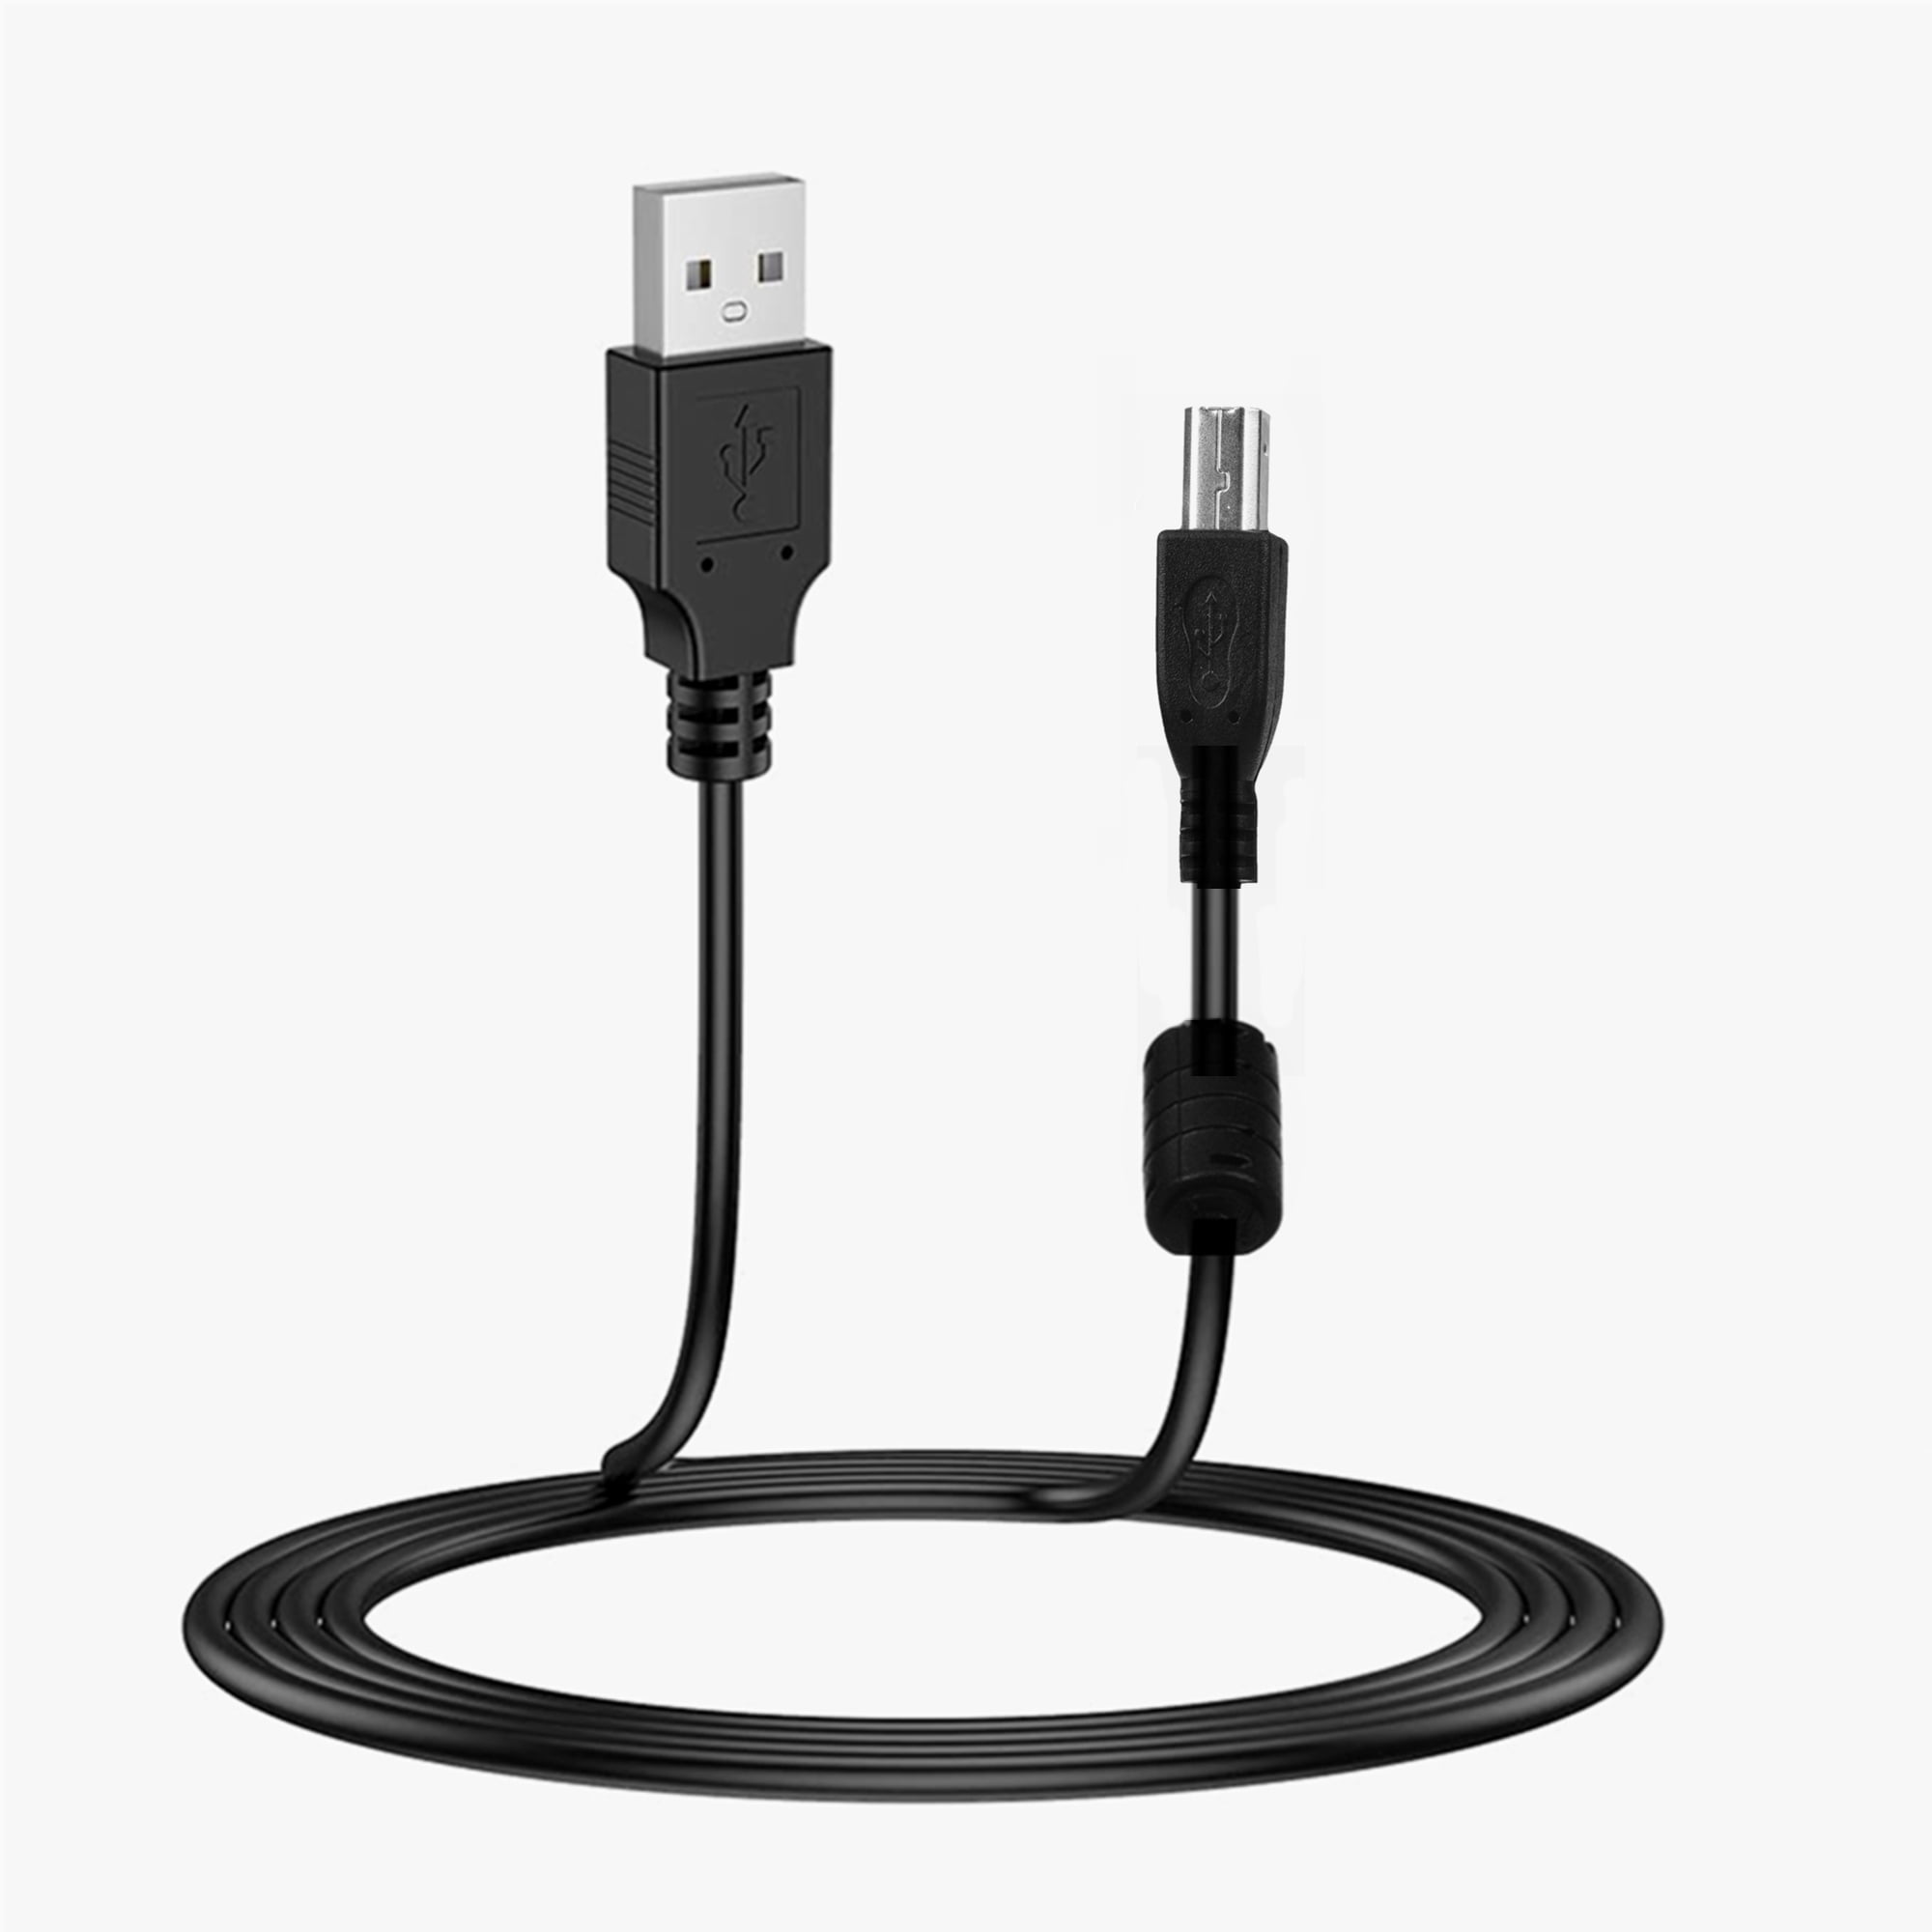 USB Cable Cord For Numark Mixdeck Universal DJ System CD MP3 Player Controller 